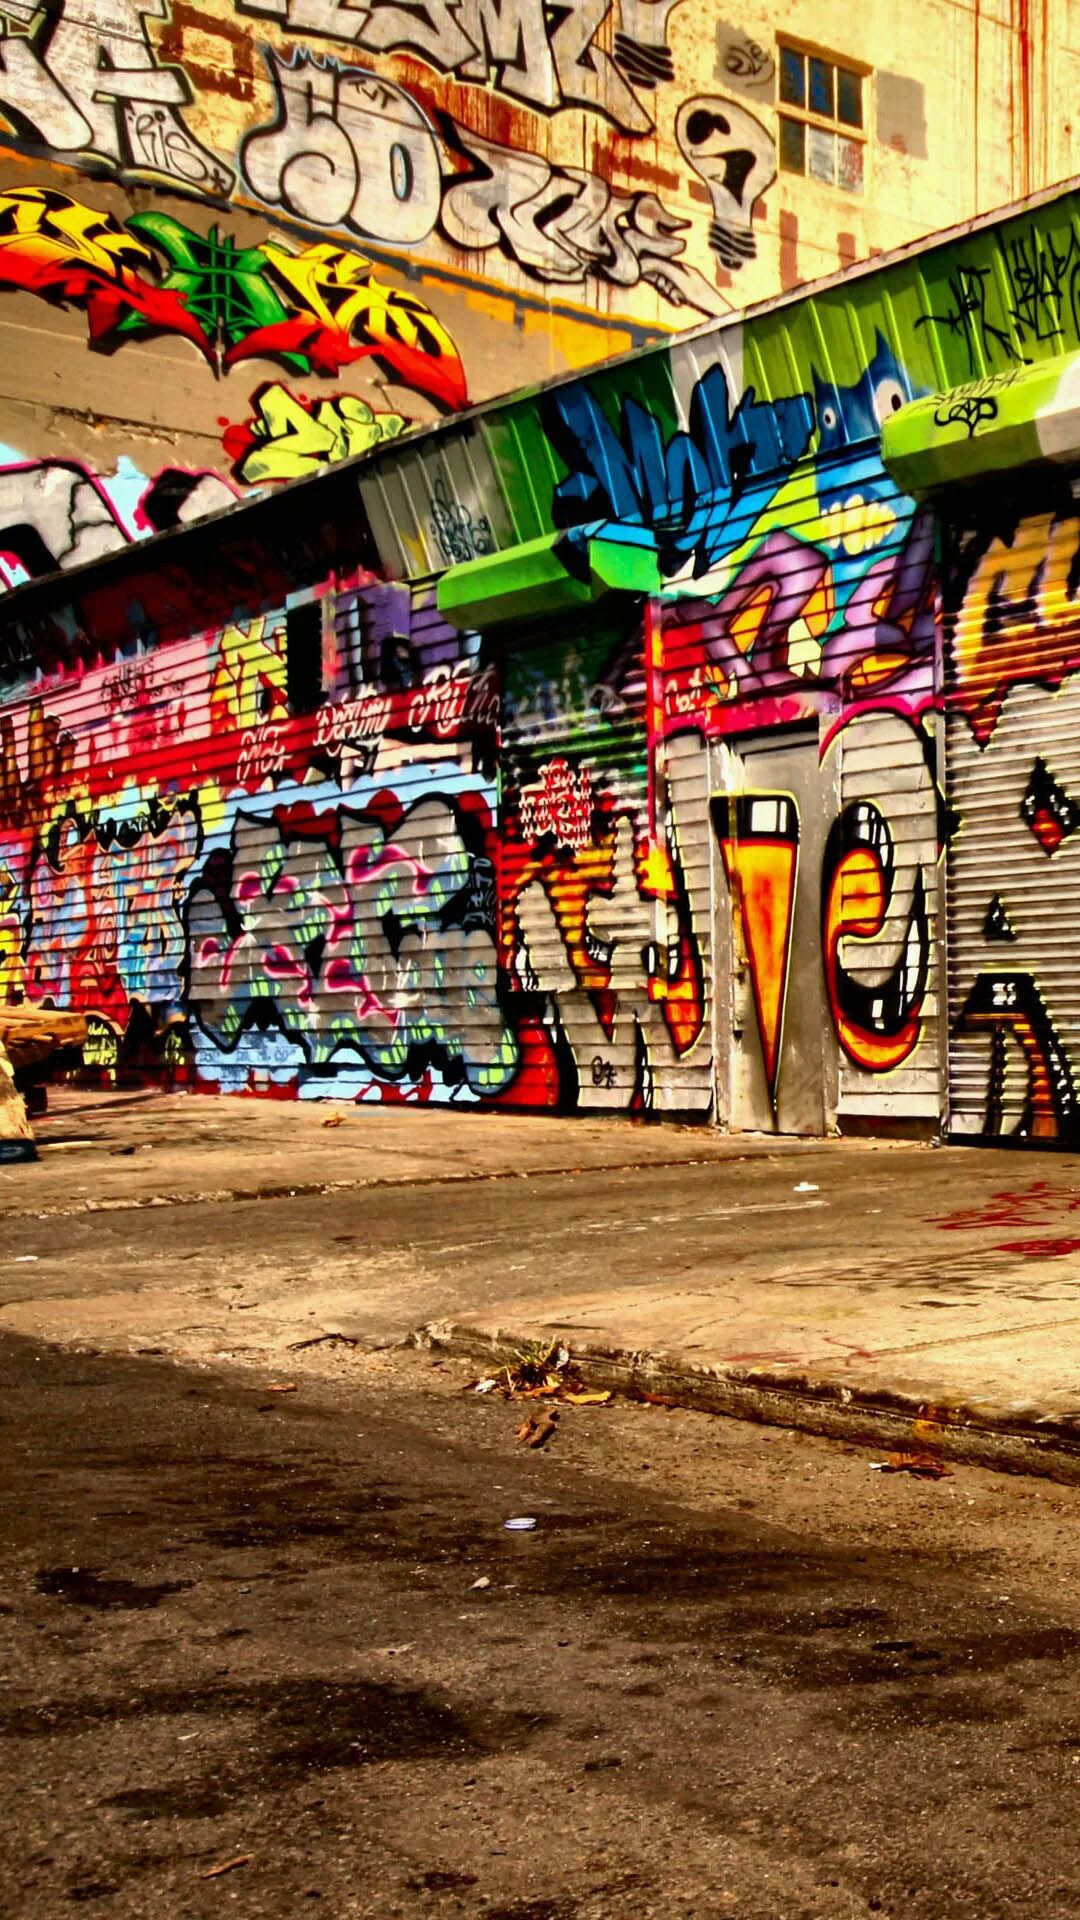 Colorful Graffiti City Alley Street Art Android Wallpaper